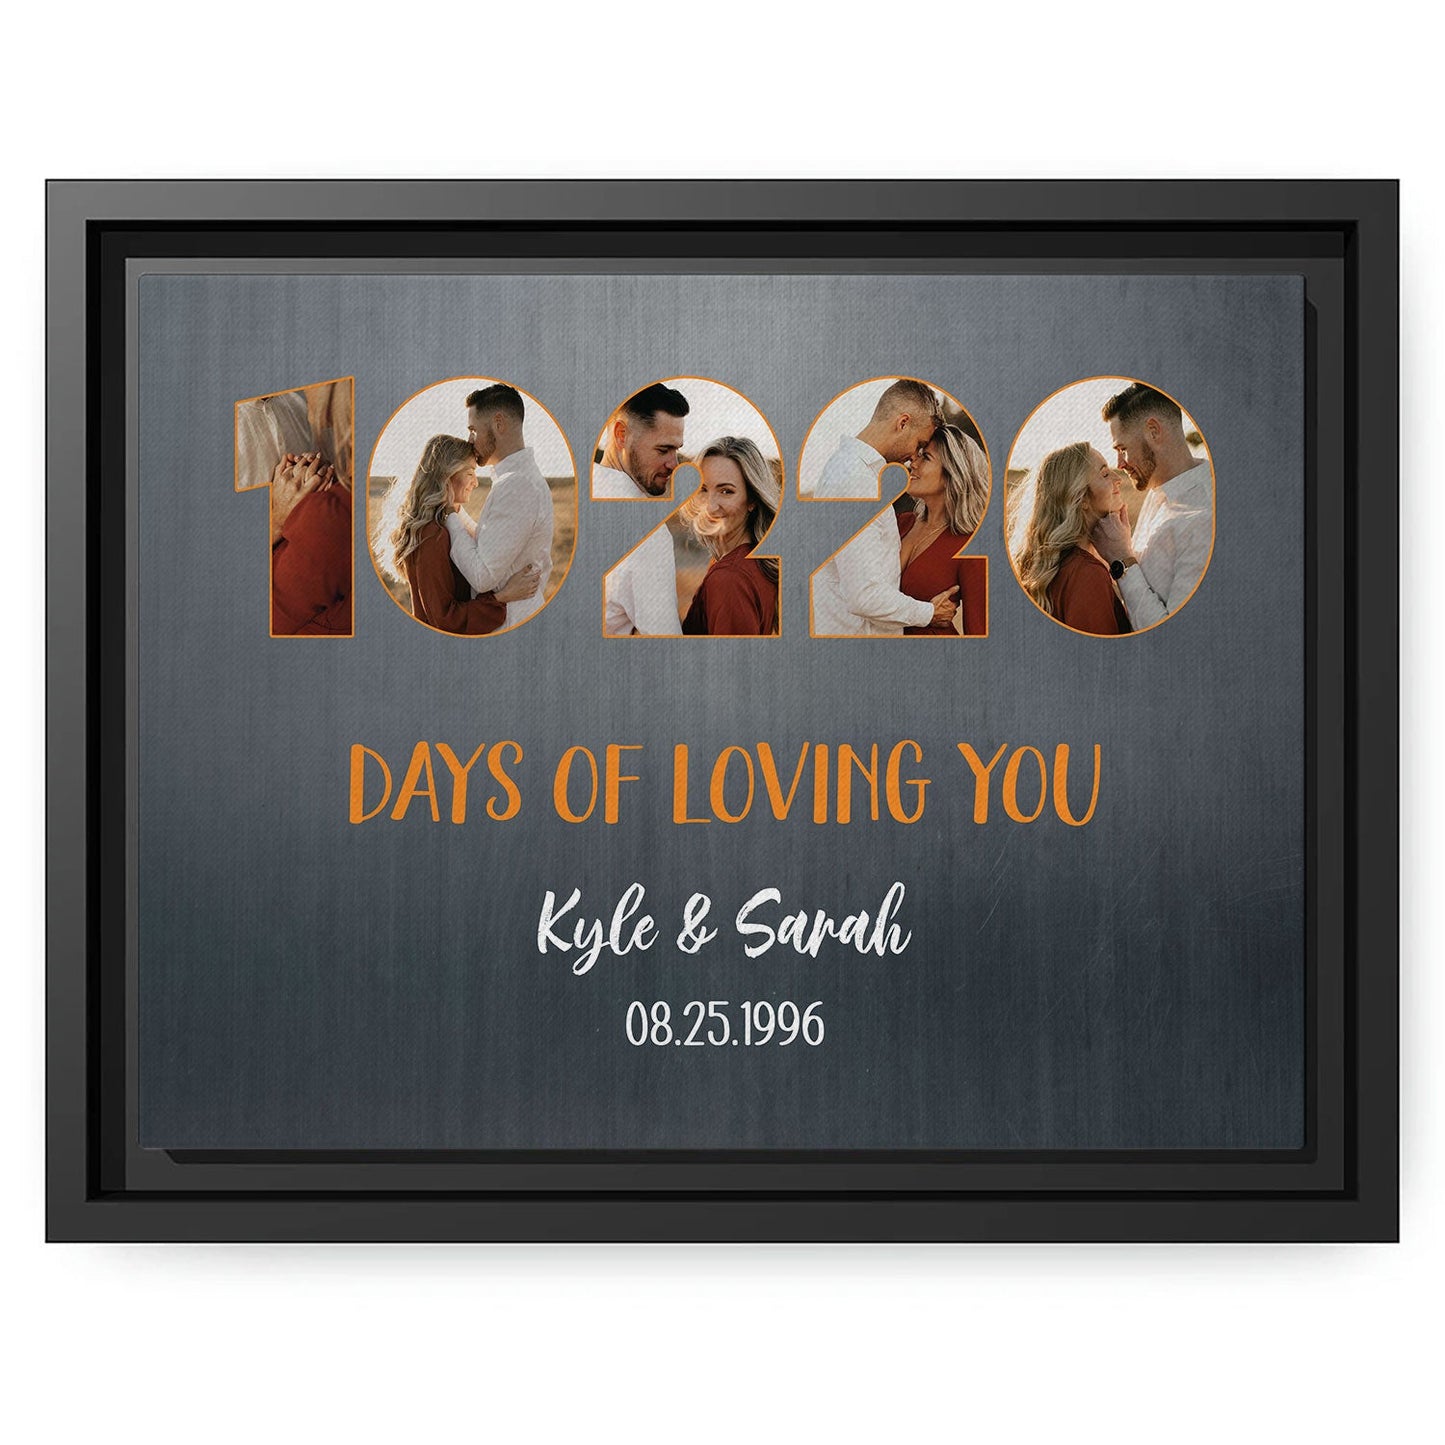 10220 Days Of Loving You - Personalized 28 Year Anniversary gift For Husband or Wife - Custom Canvas Print - MyMindfulGifts